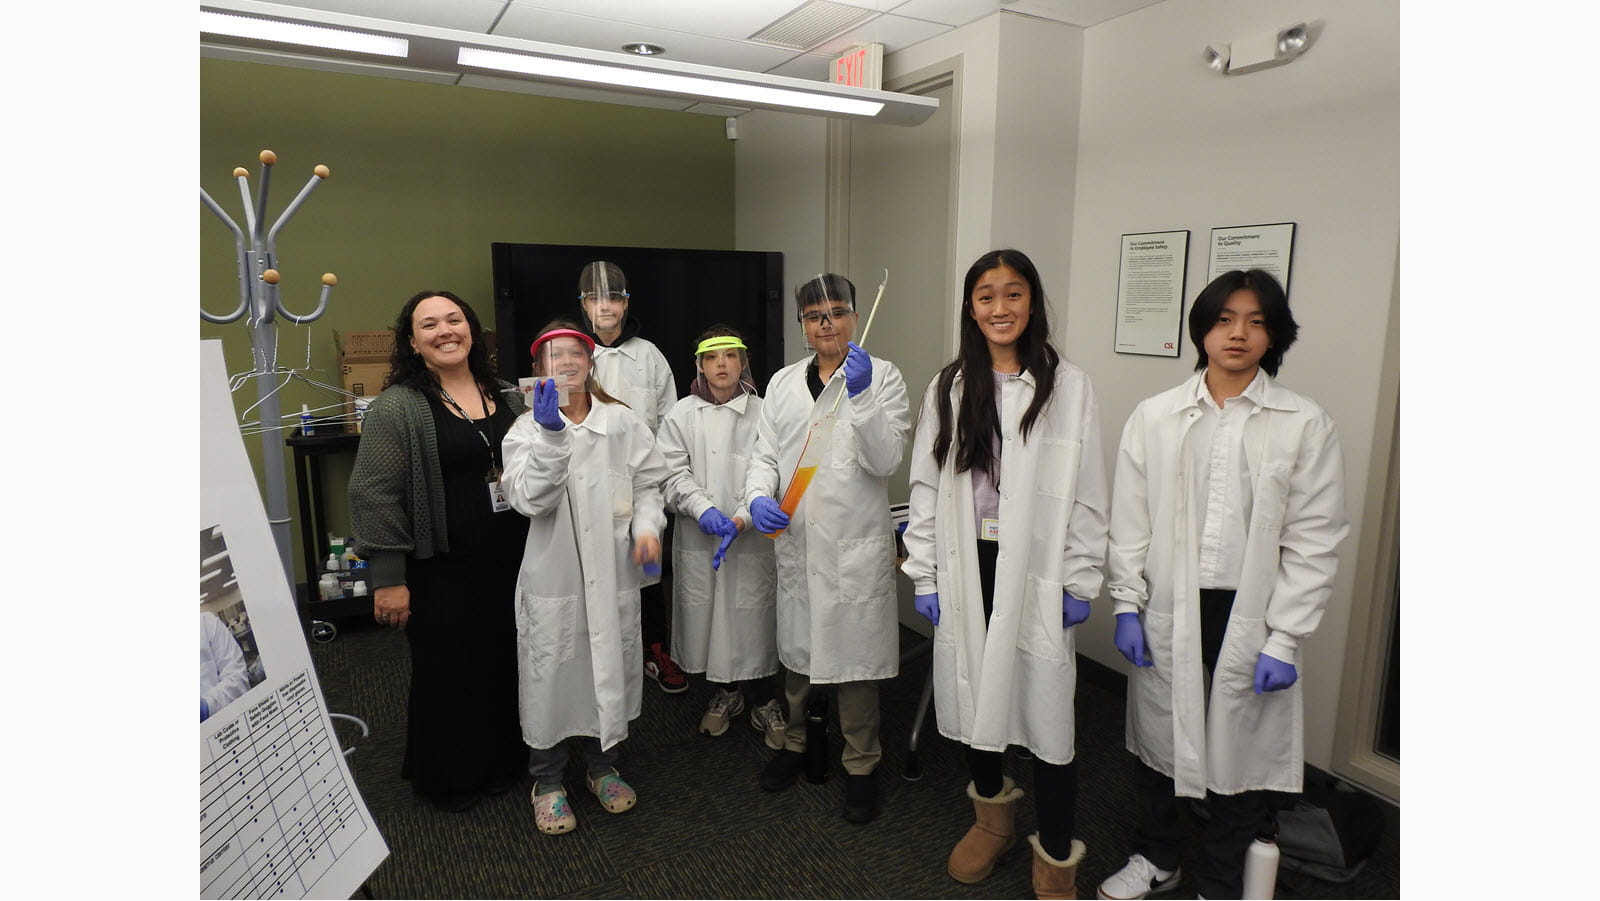 Children and teens suit up in lab coats during Take Our Daughters and Sons to Work Day at CSL.